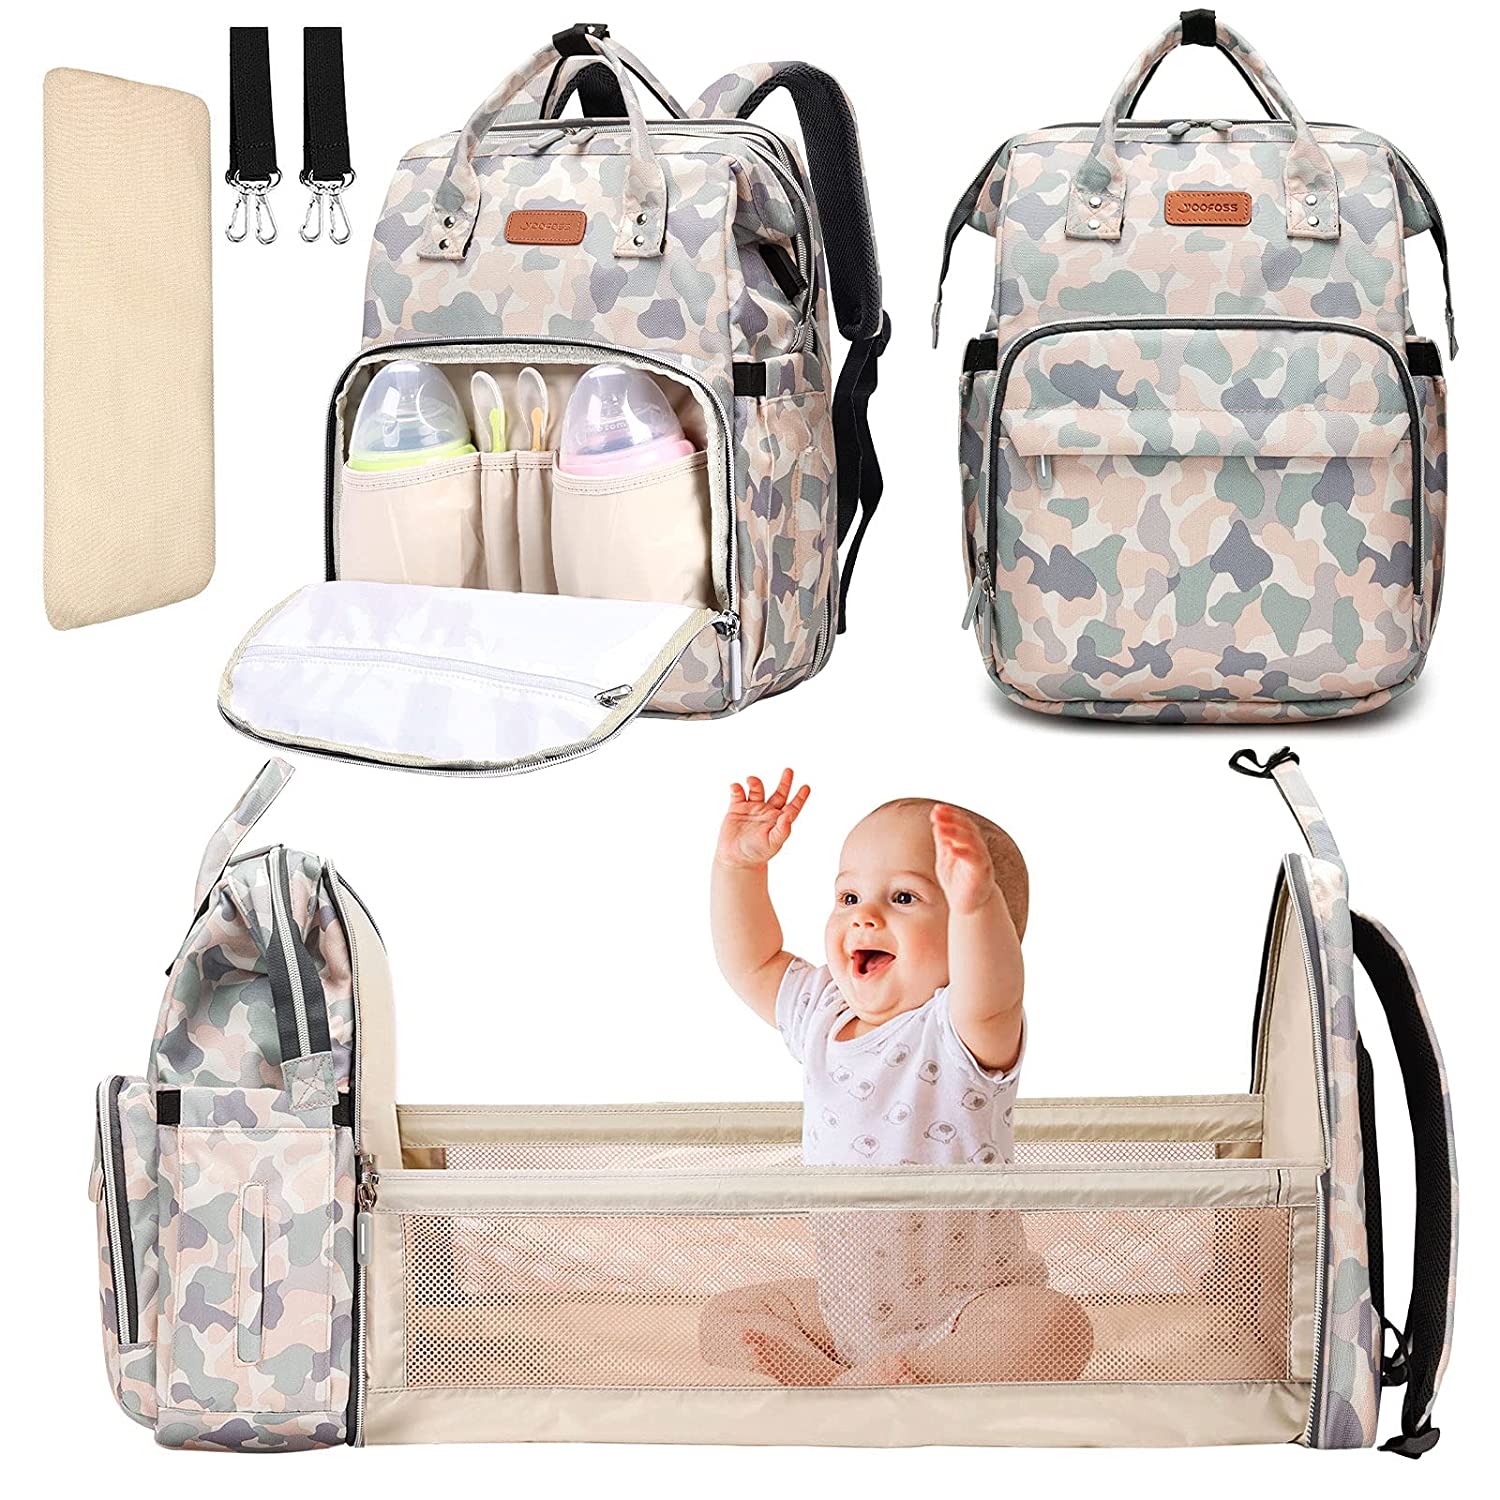 SNDMOR Baby Changing Bag Backpack Nappy Changing Bags Large Capacity P